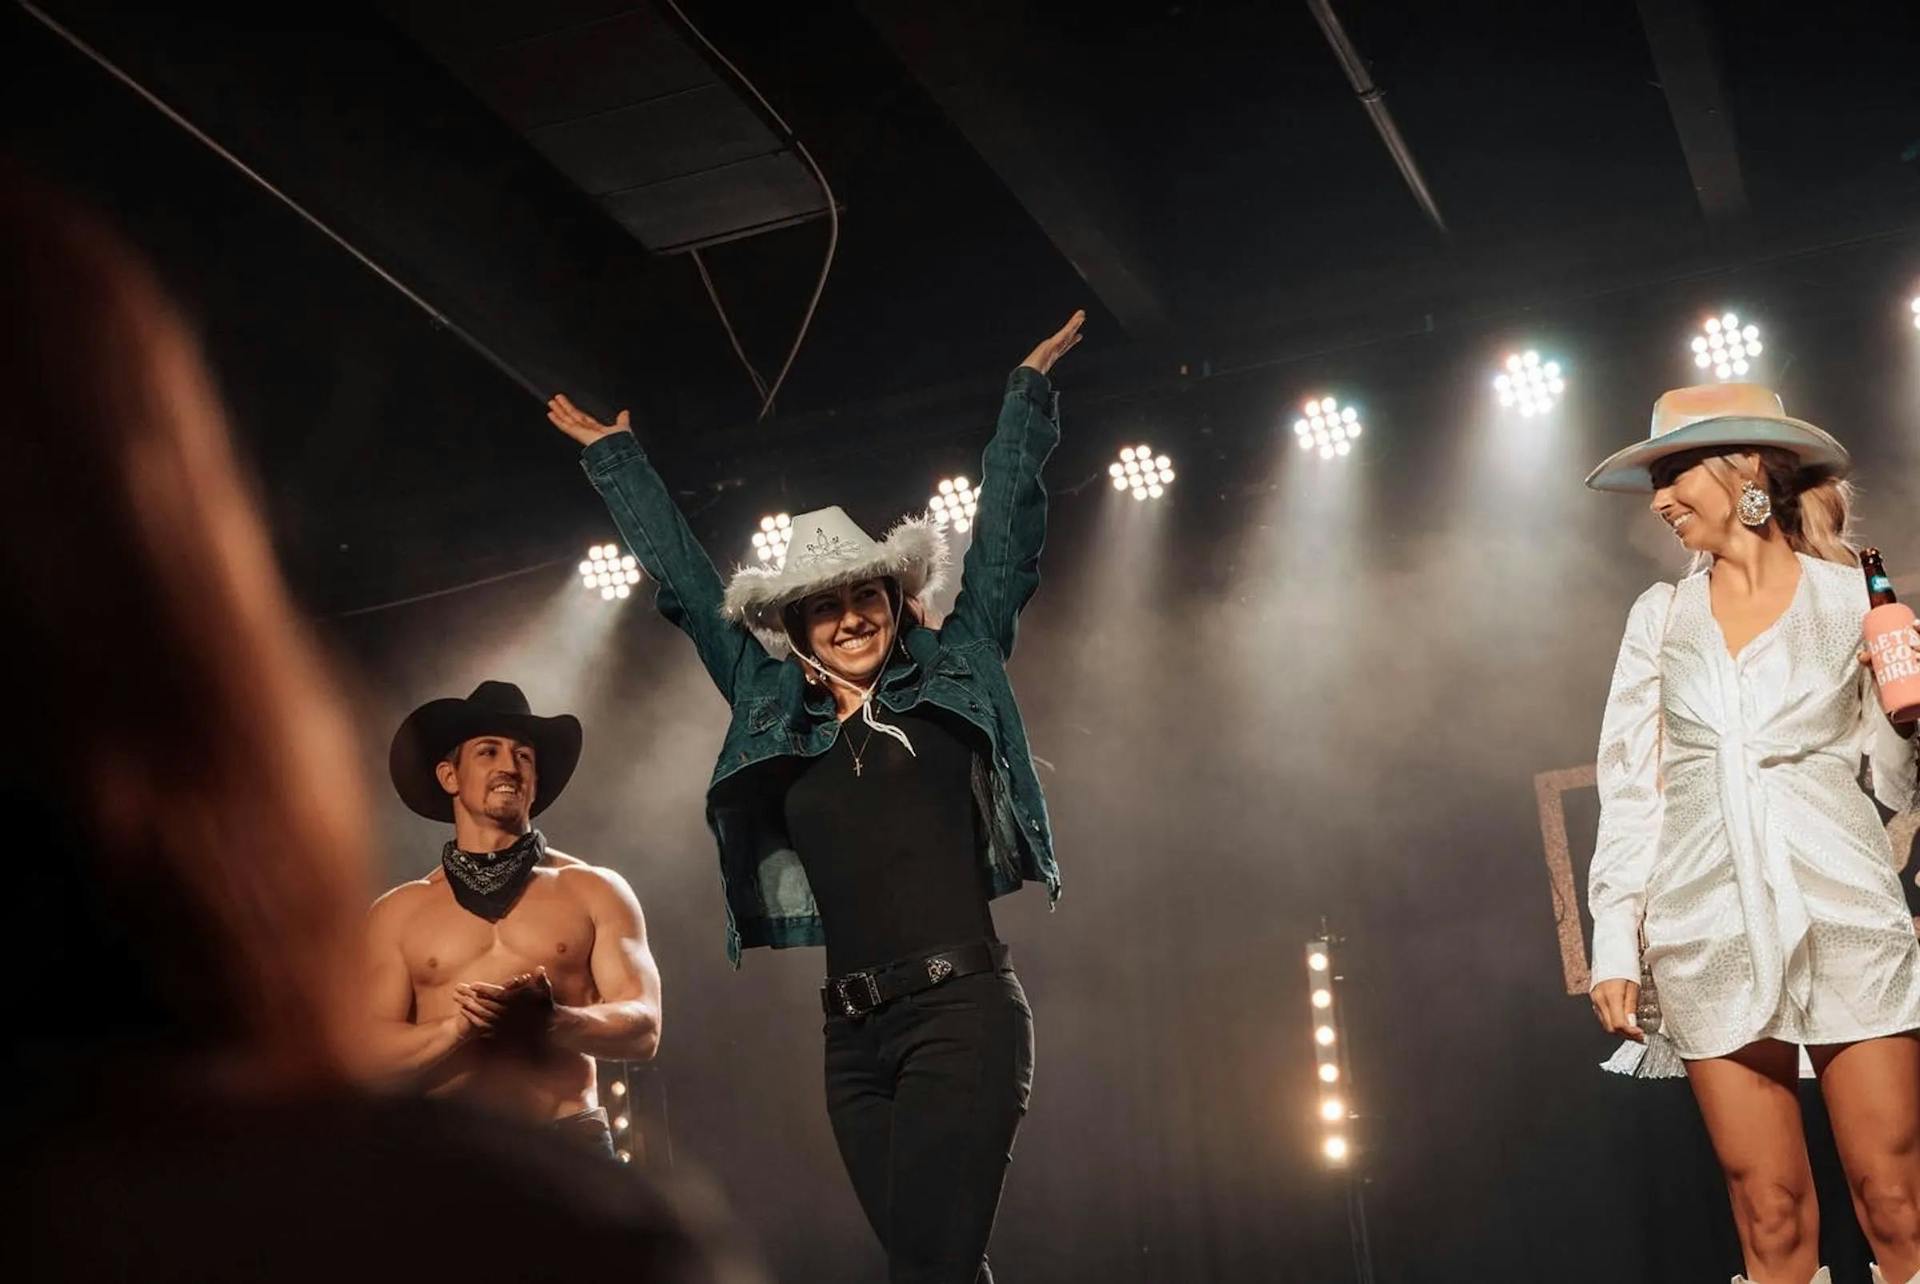 Ranch Hands: Shirtless Cowboy Burlesque at The Austin Creek and Cave image 16